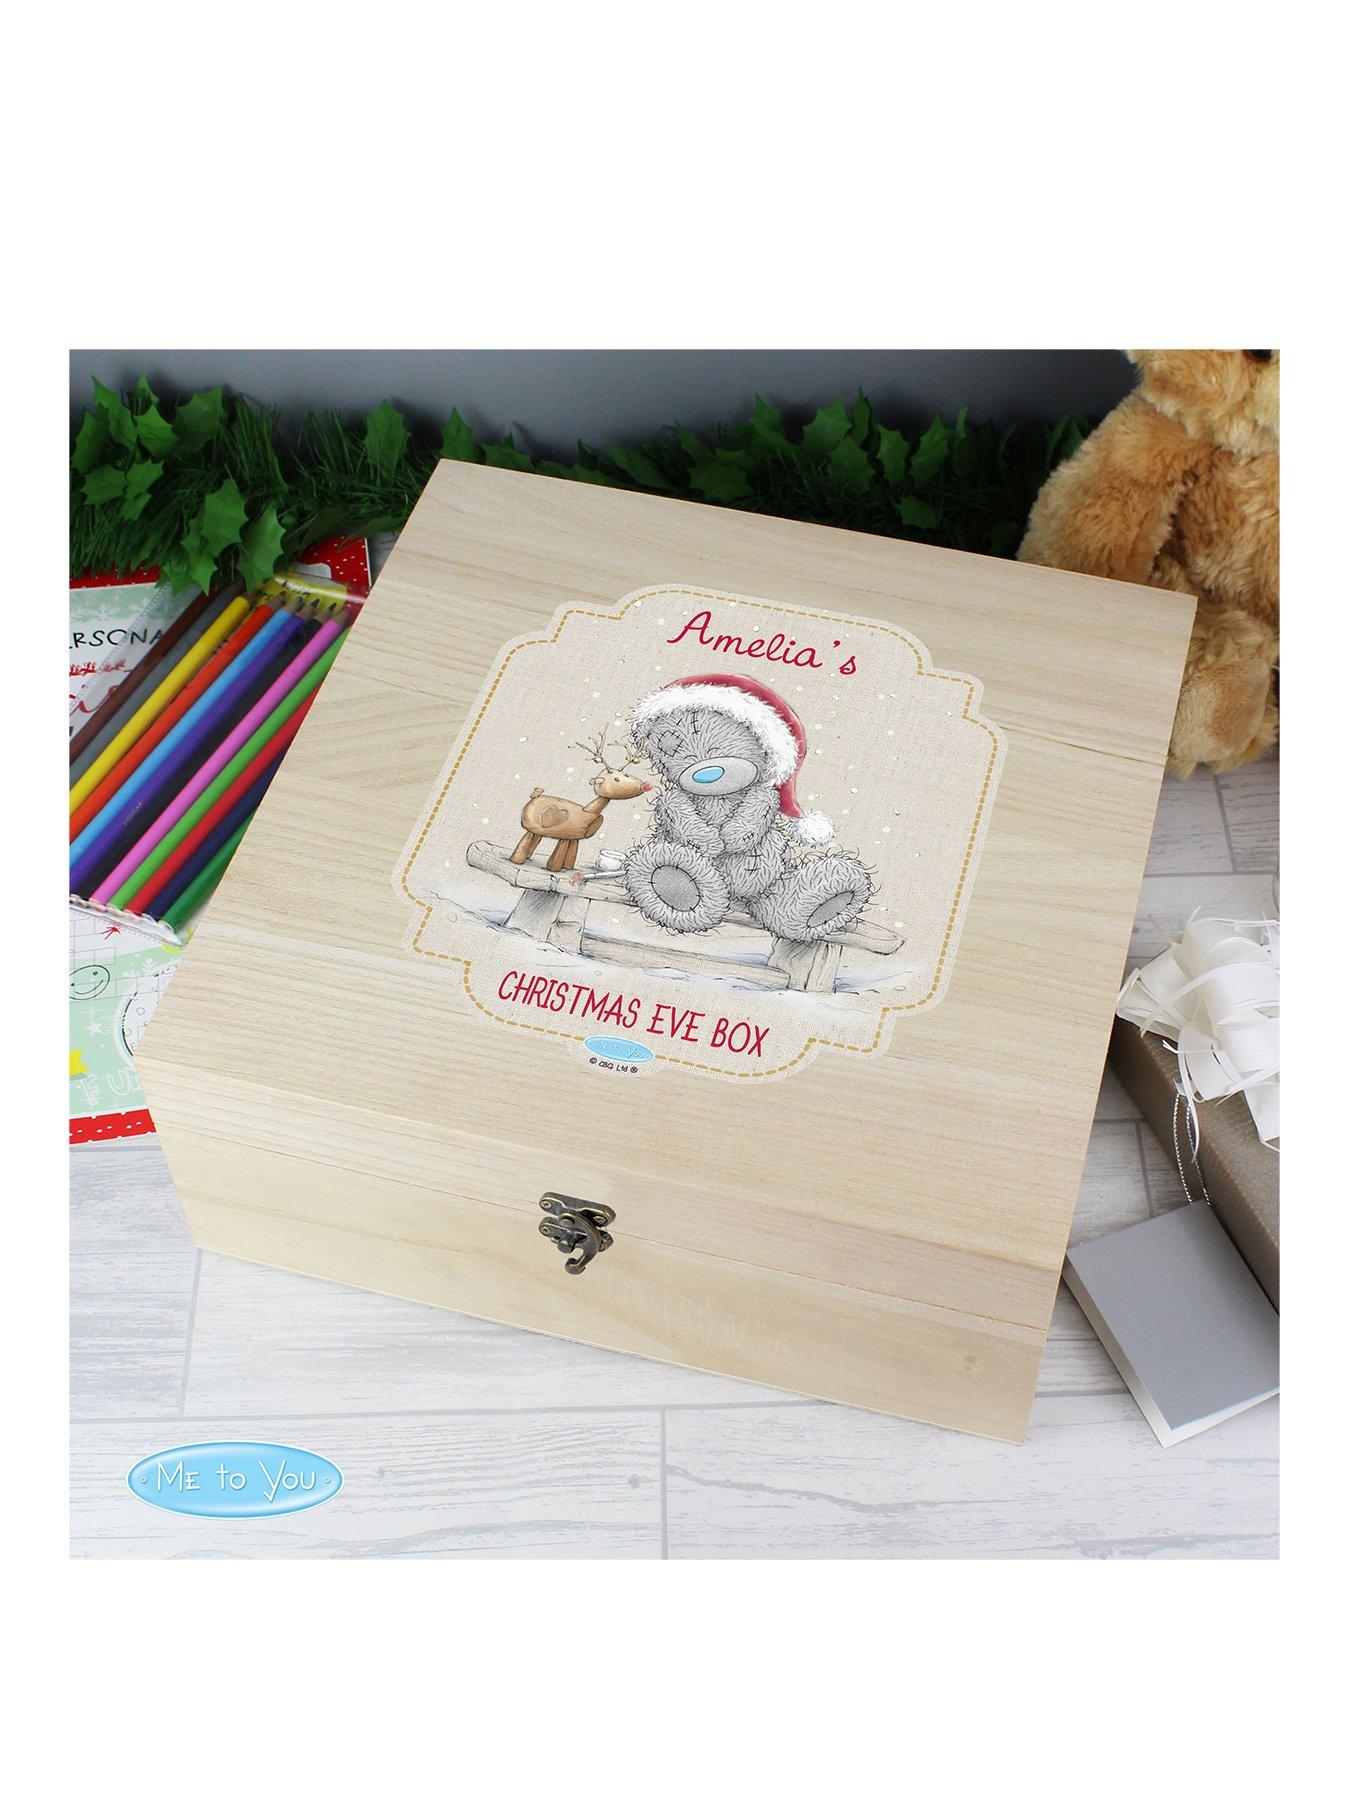 Size 30cm x 19.5cm x 18cm Wooden Christmas Eve Box WHITE WITH RED PICTURES